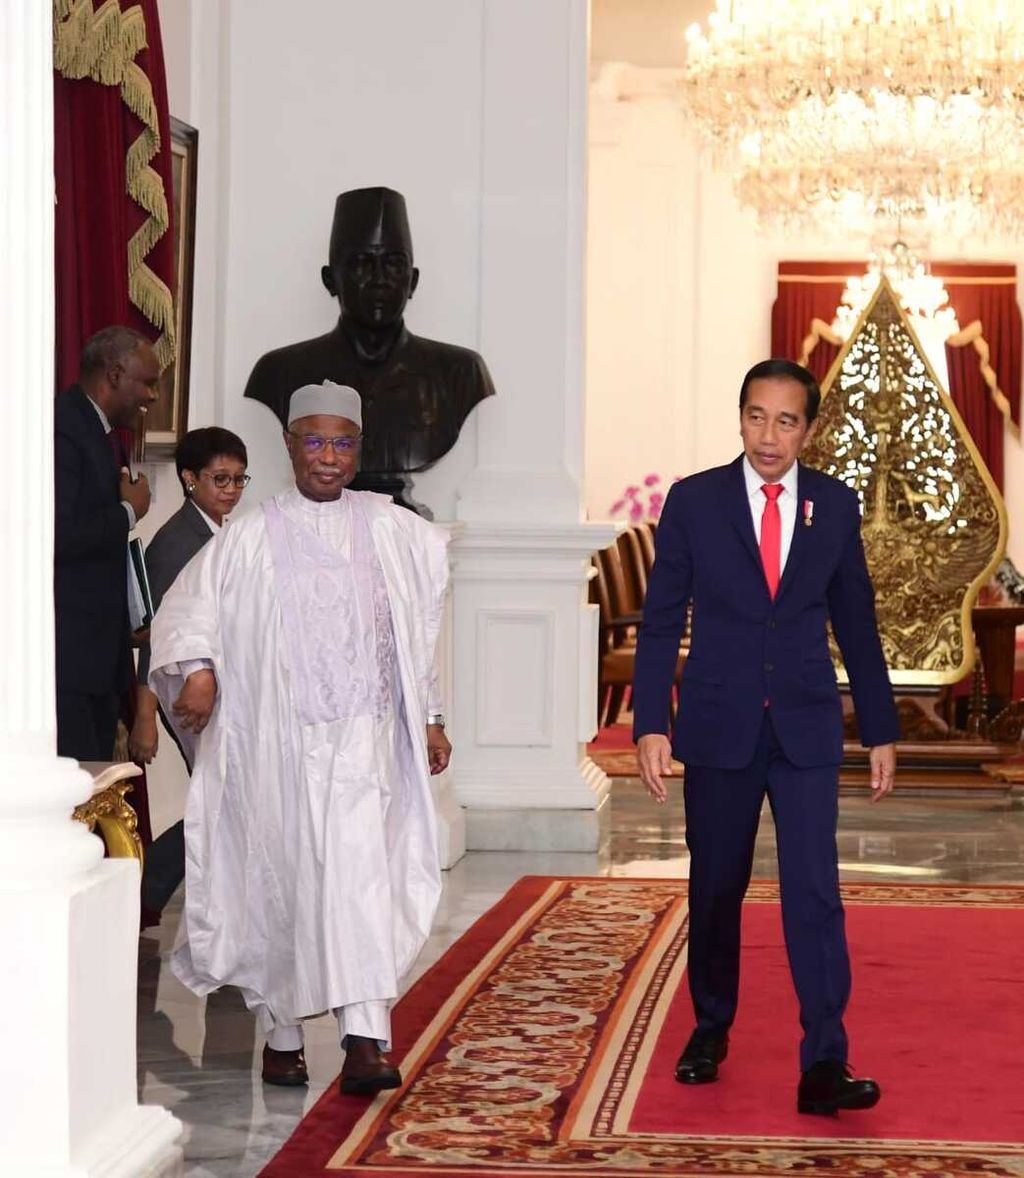 President Joko Widodo received a visit from the Secretary-General of the Organisation of Islamic Cooperation (OIC), Hissein Brahim Taha, at the Merdeka Palace in Jakarta on Monday (7/8/2023).